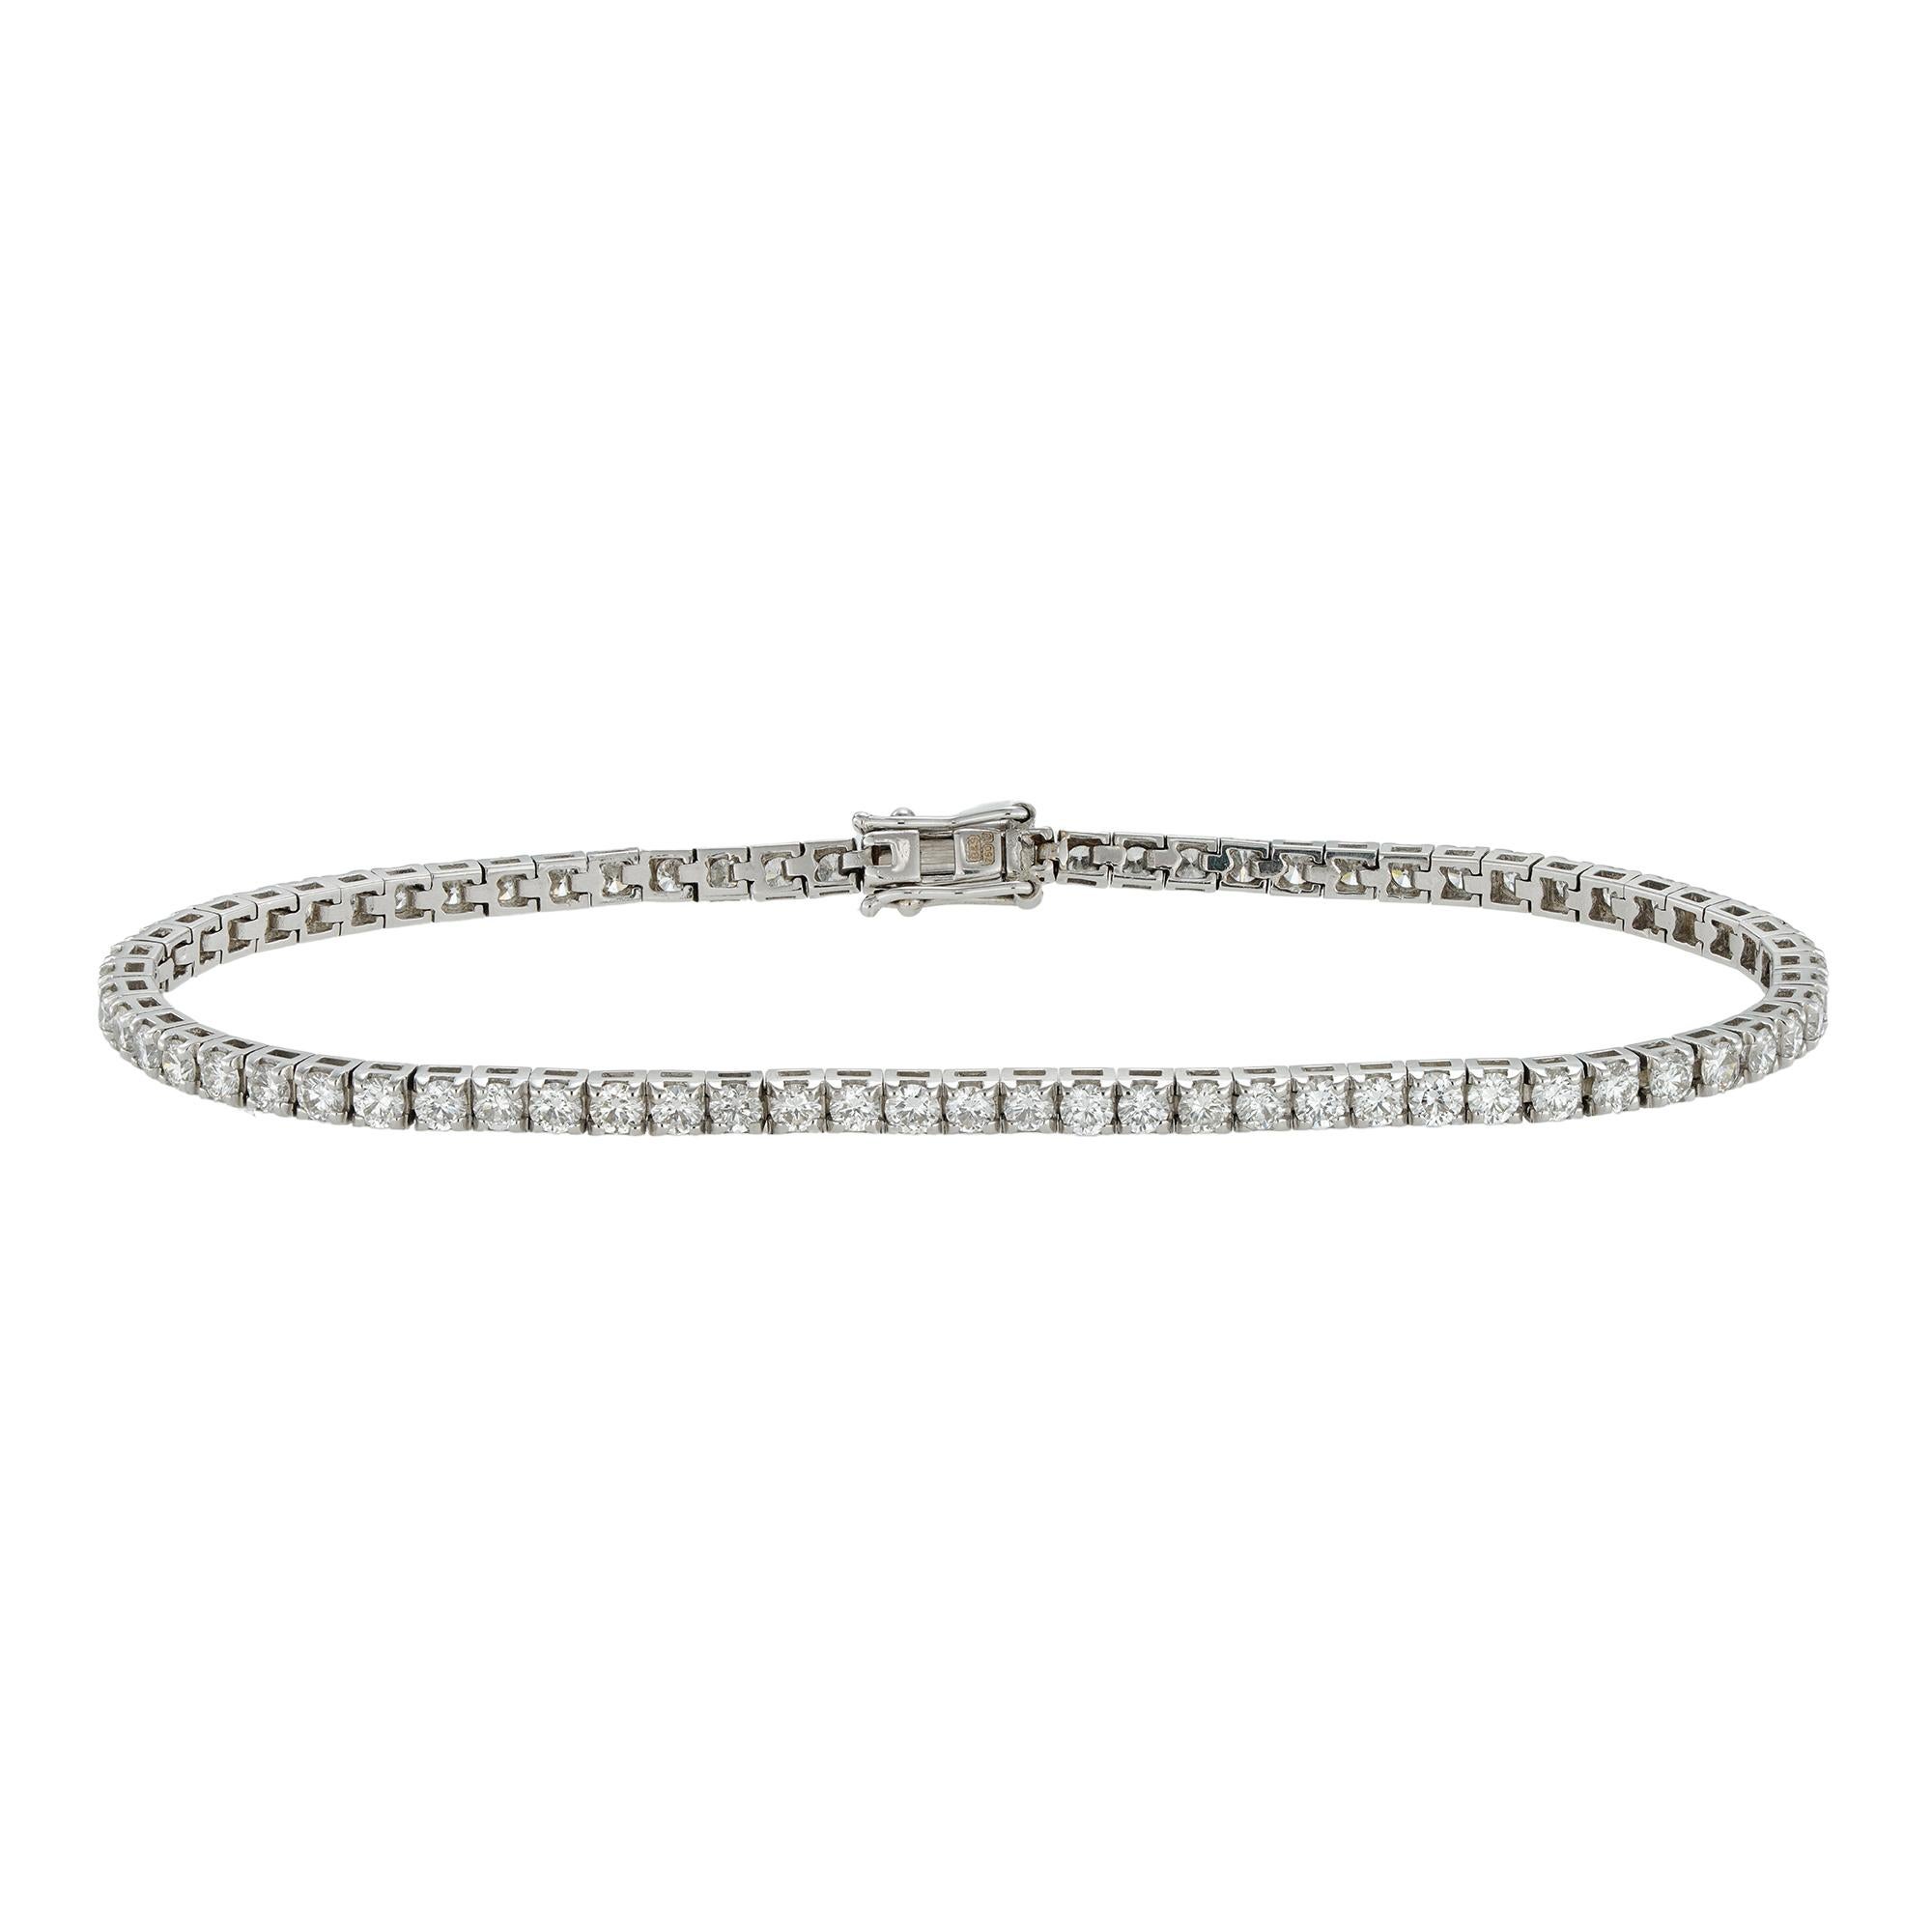 A diamond line bracelet set with 72 round brilliant-cut diamonds, weighing a total of 2.97 carats, all four claw-set to a white gold articulated mount with a concealed push clasp, hallmarked 18ct gold London 2016, bearing the Bentley & Skinner